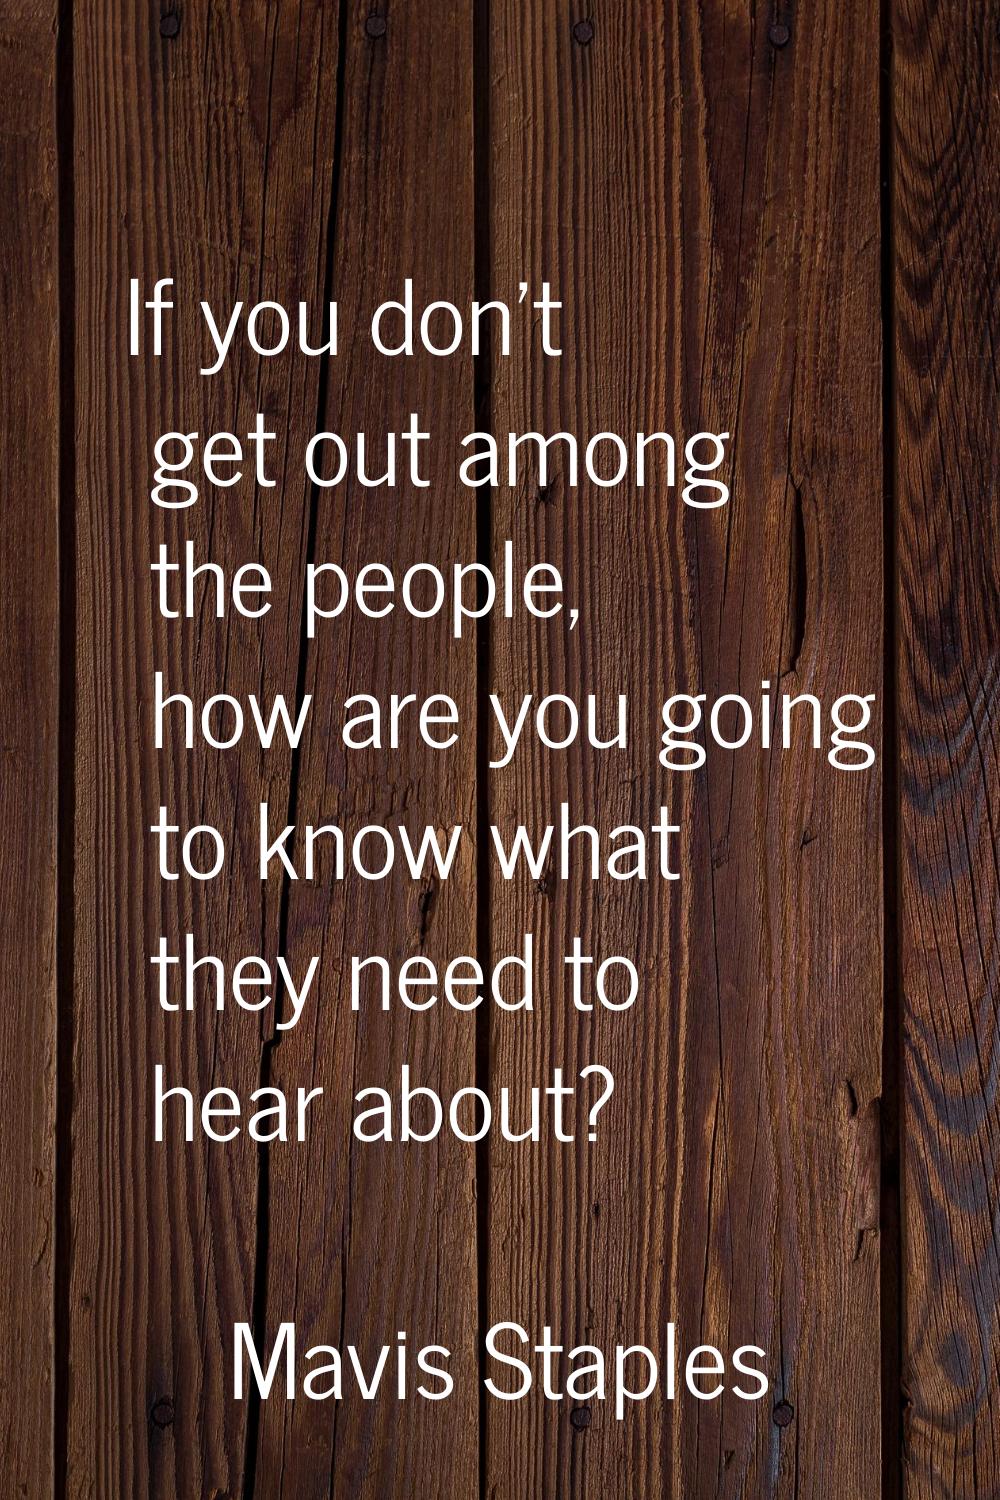 If you don't get out among the people, how are you going to know what they need to hear about?